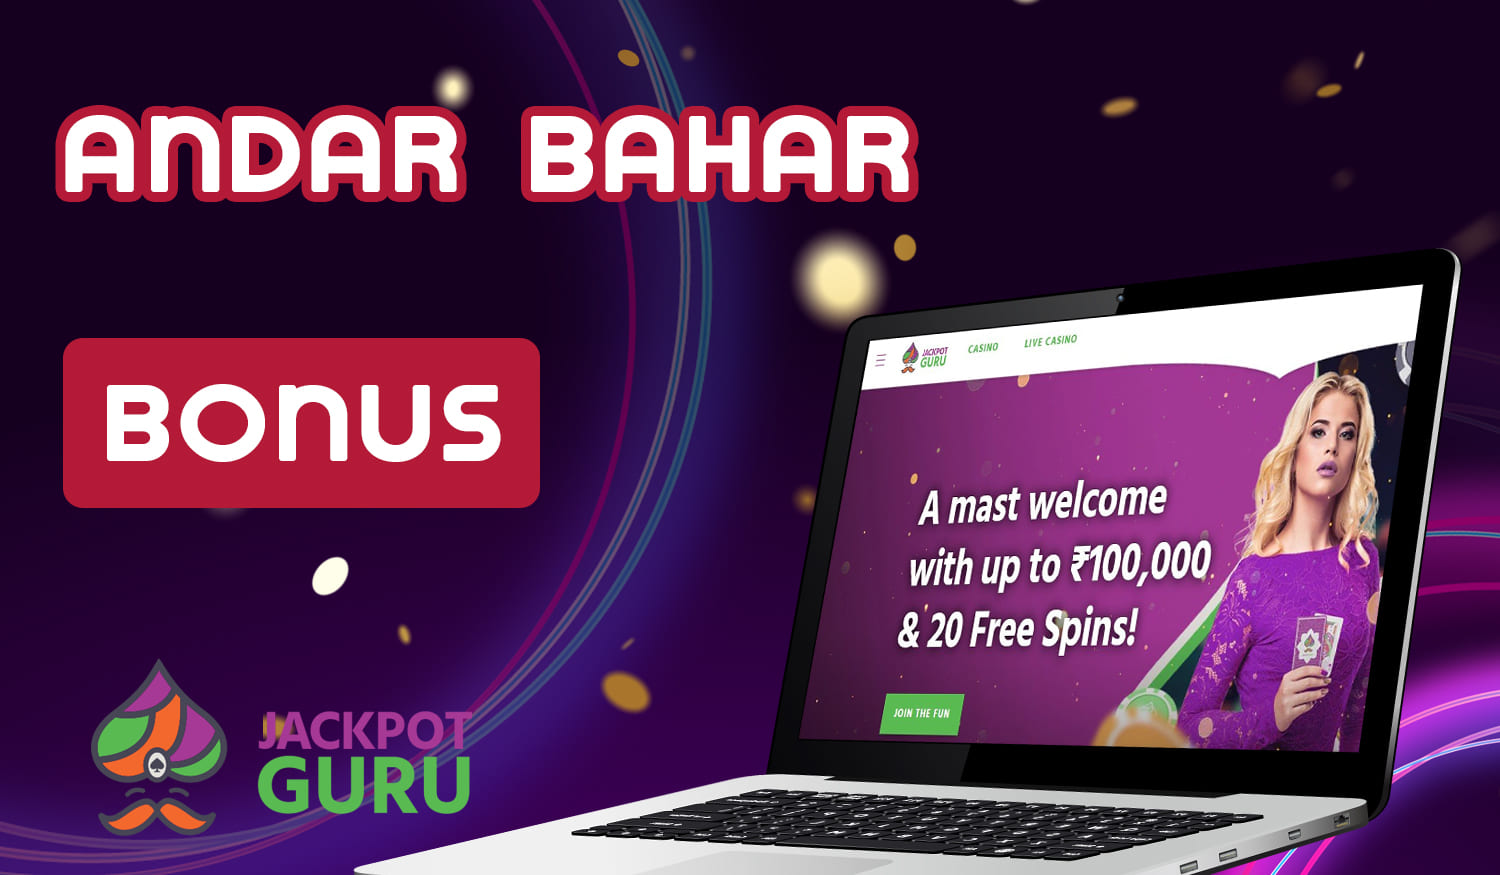 List of promotions and bonuses available at Jackpot Guru for Andar Bahar game